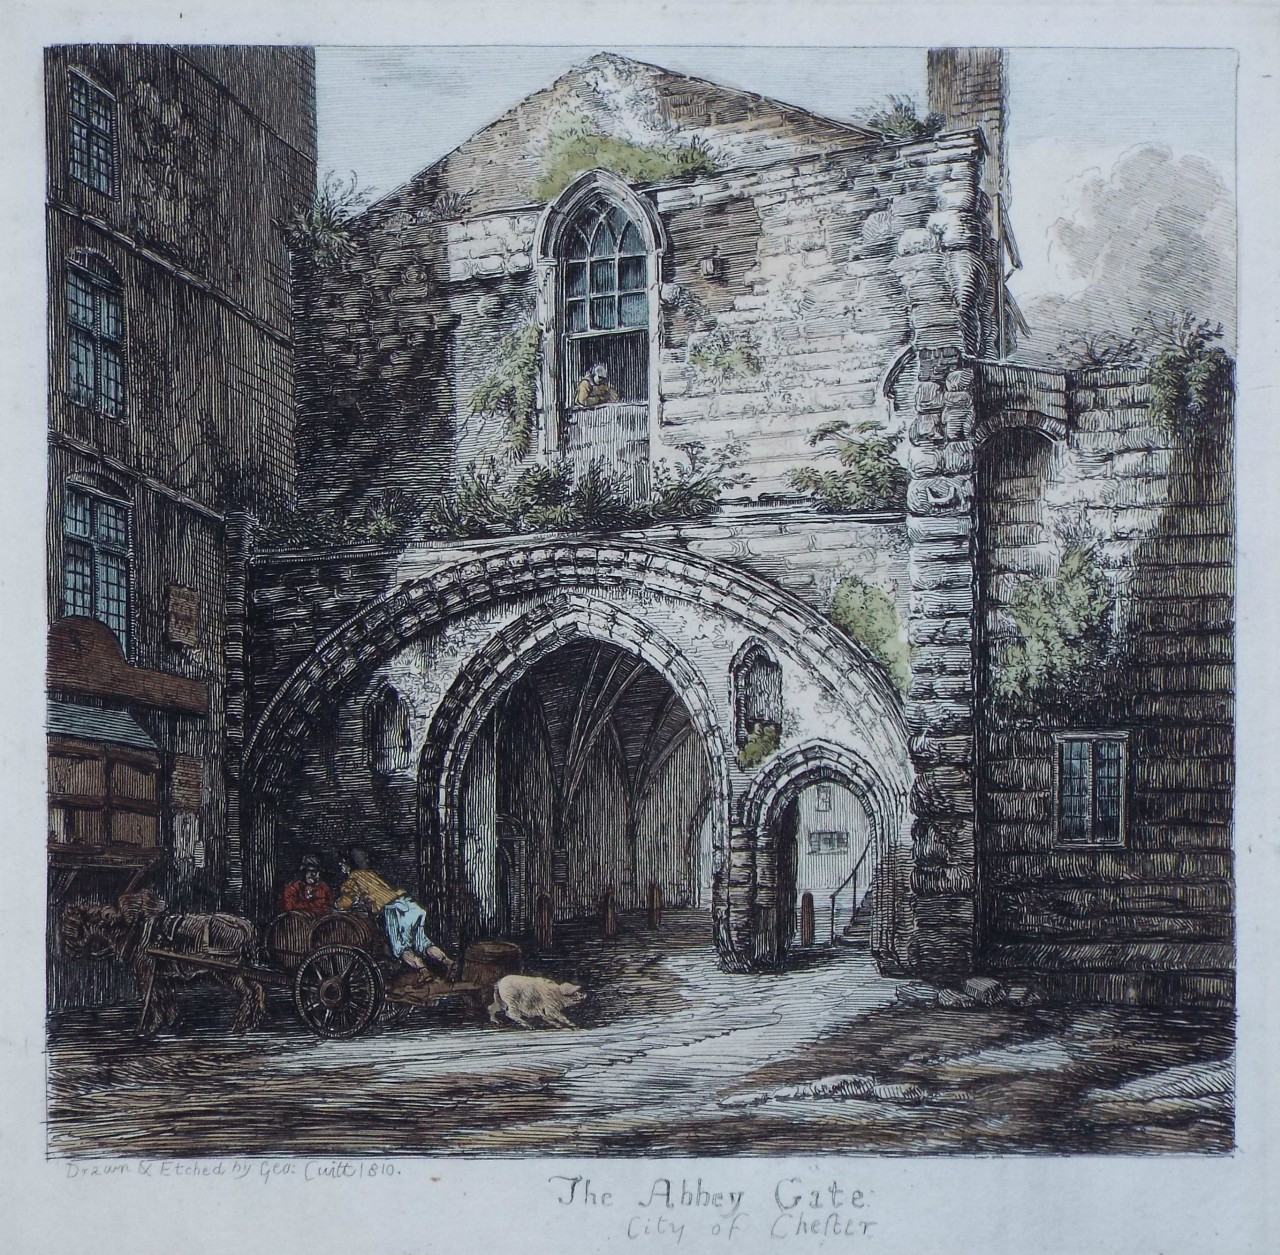 Etching - The Abbey Gate City of Chester - Cuitt